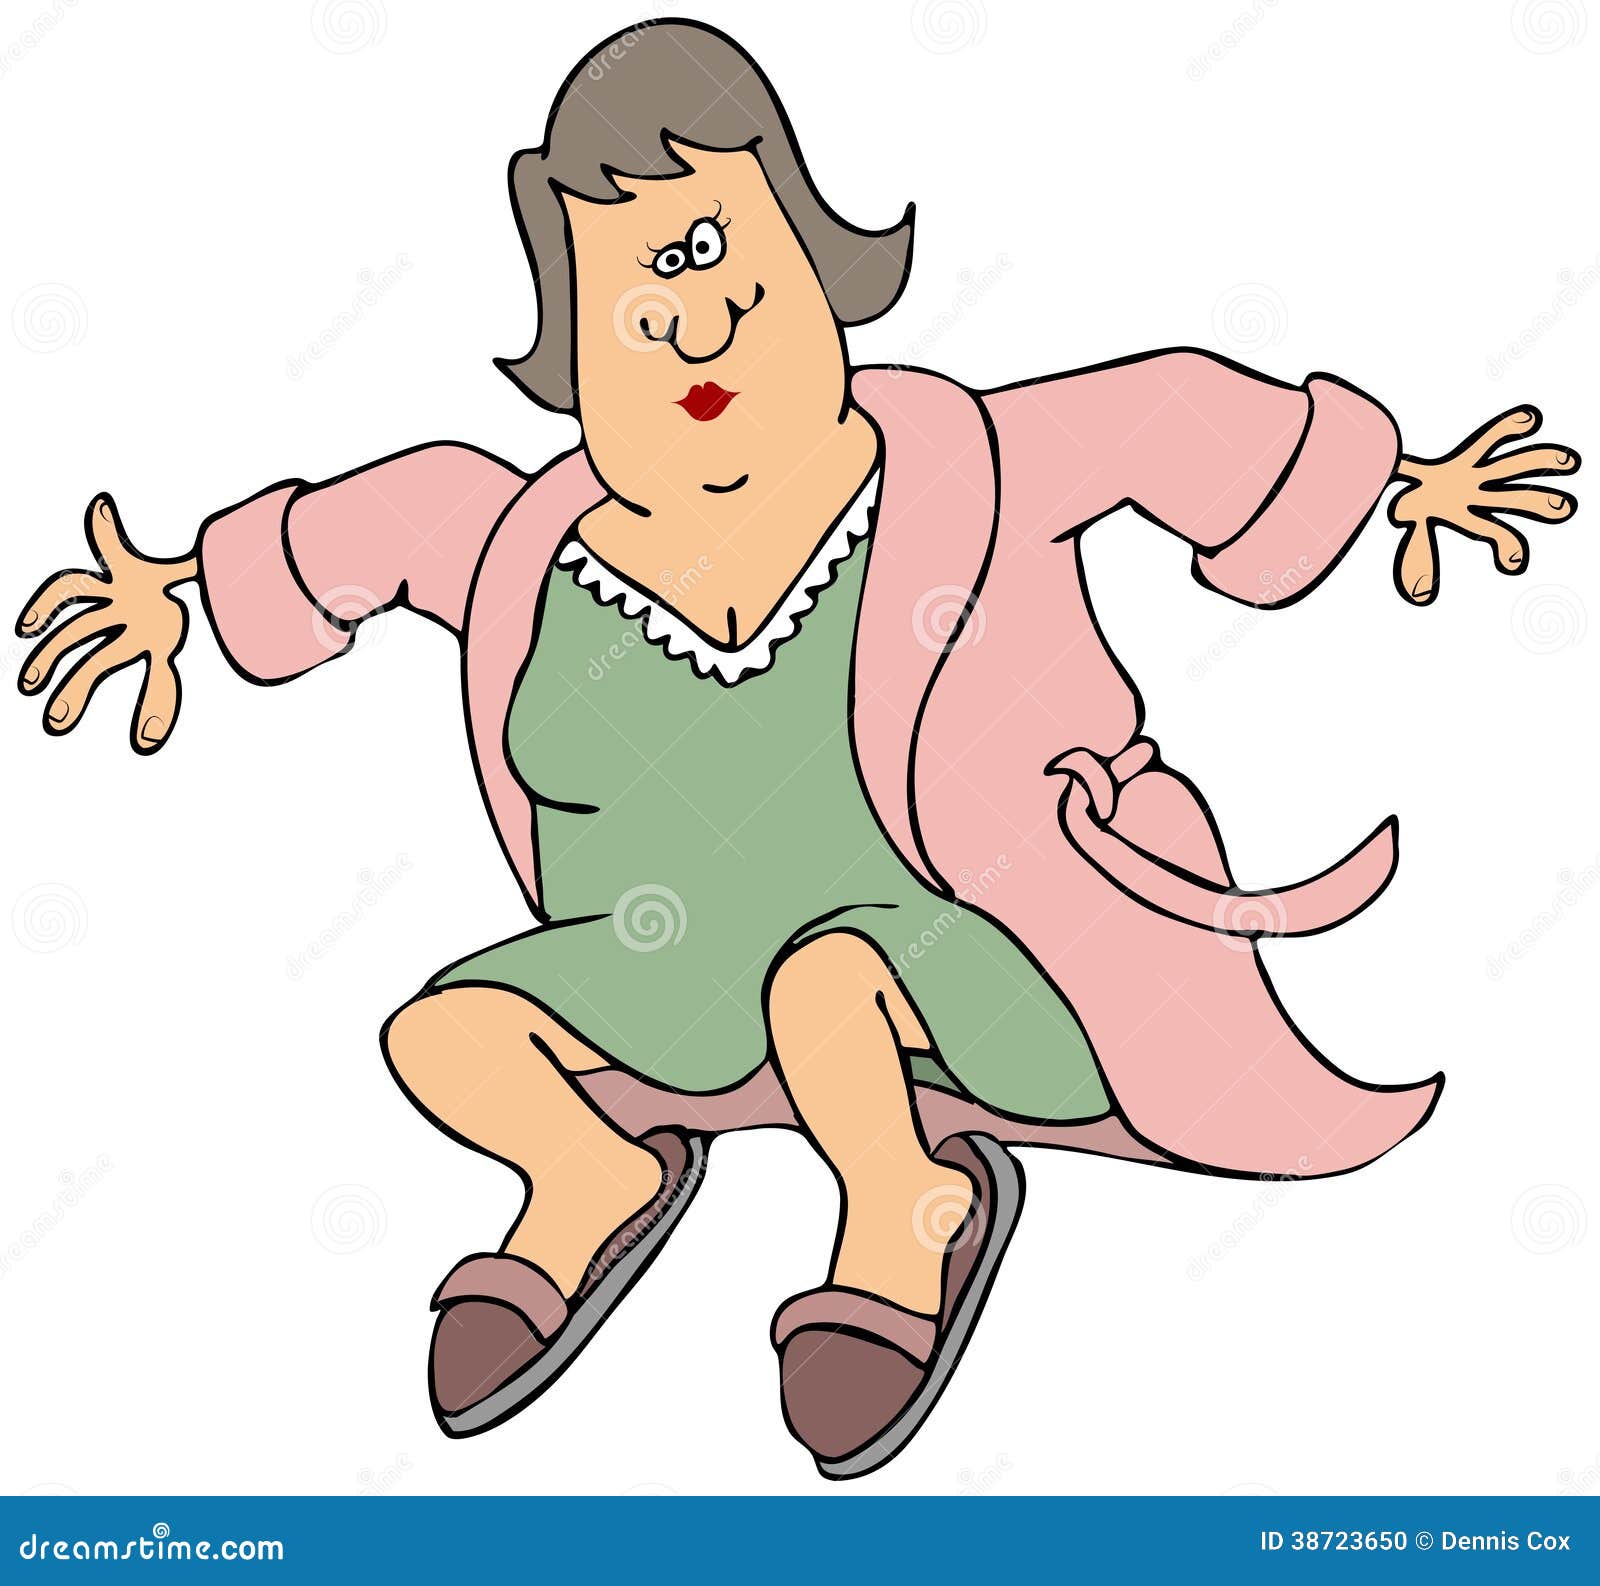 nightgown clipart - photo #49